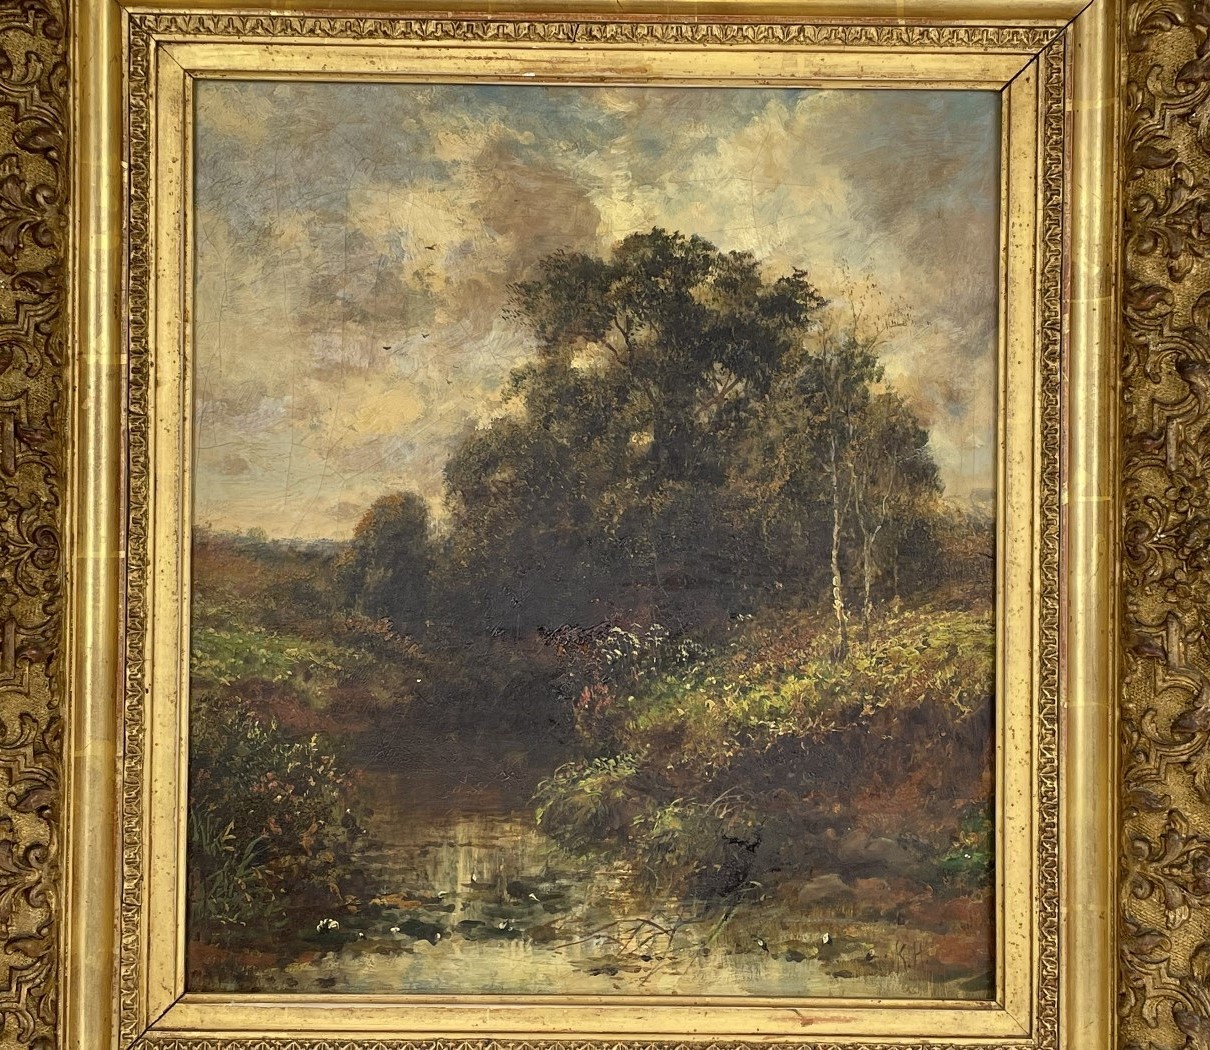 Early 20th century, English school, landscape, initialed KH, oil on canvas, 38 x 33 cm, and a - Image 2 of 5